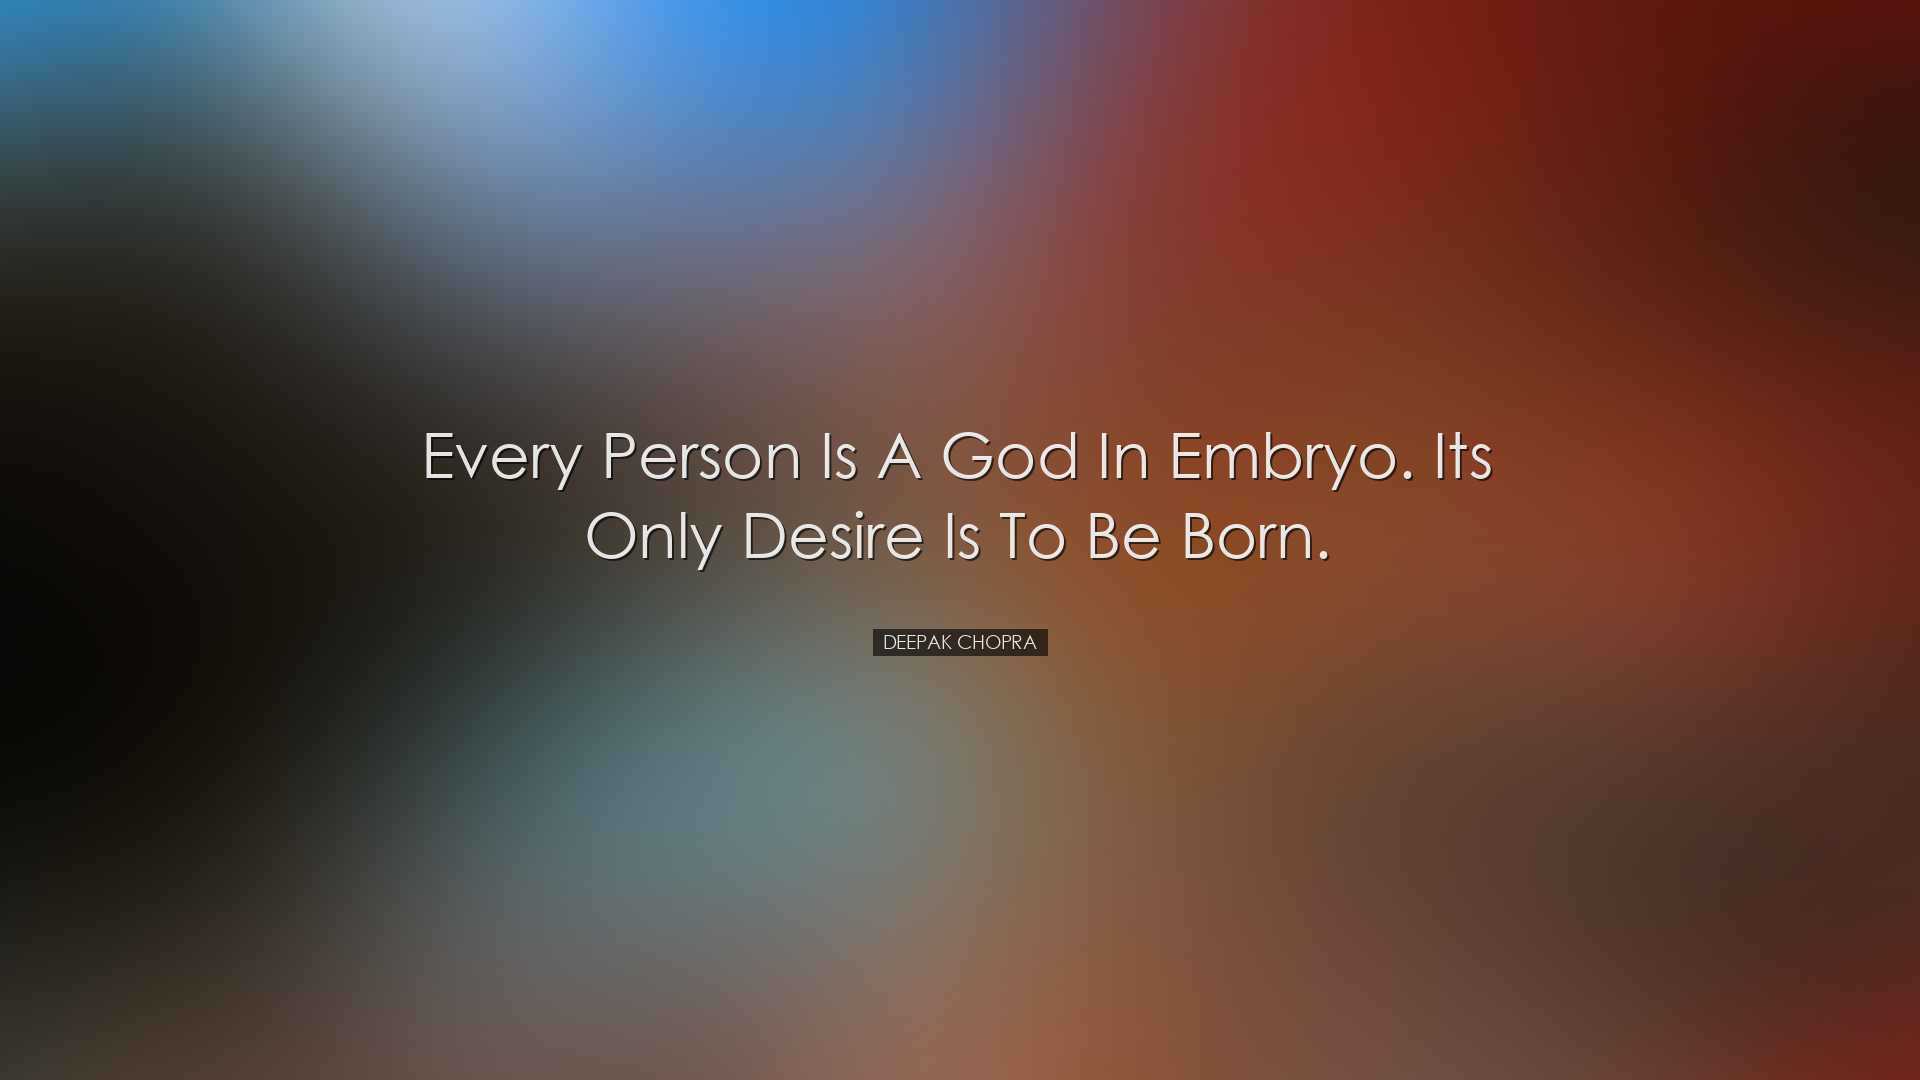 Every person is a God in embryo. Its only desire is to be born. -